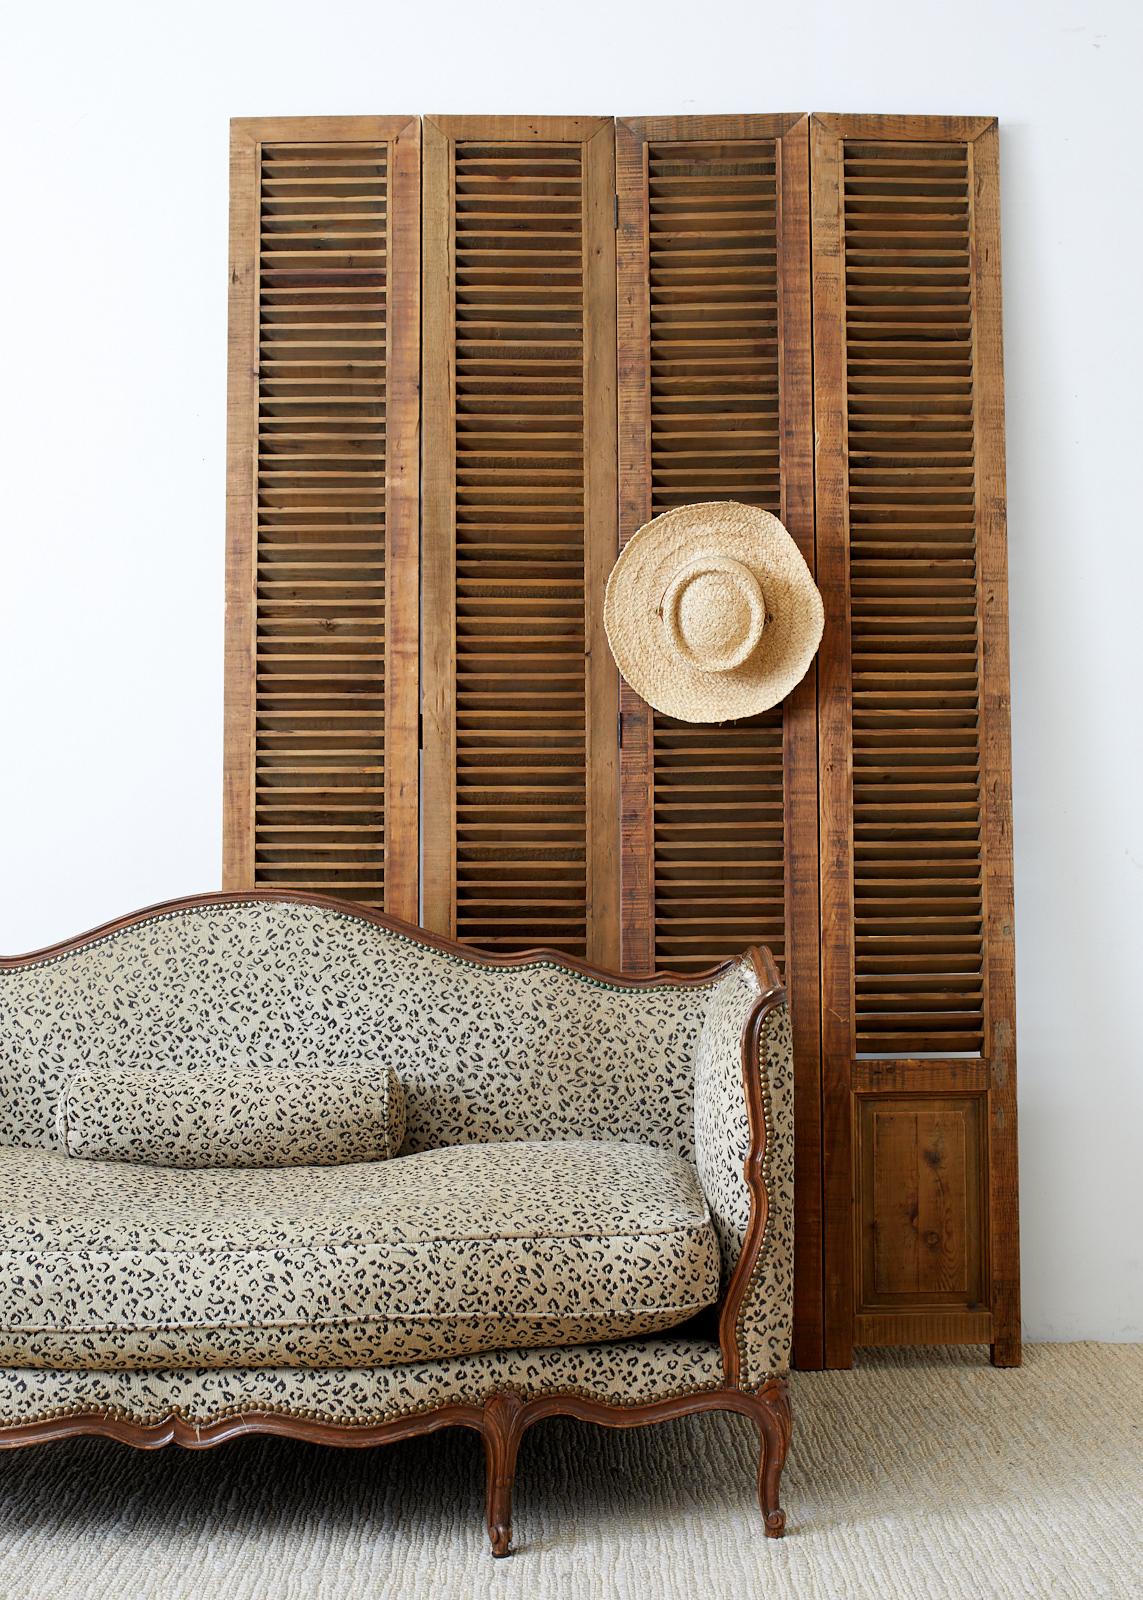 Handsome folding screen made of twelve pine panels each with a louvered window measuring 9 inches wide and 65 inches high. The shutter window style panels are in three sets of four panels measuring 13.75 inches wide for a total width of 165 inches